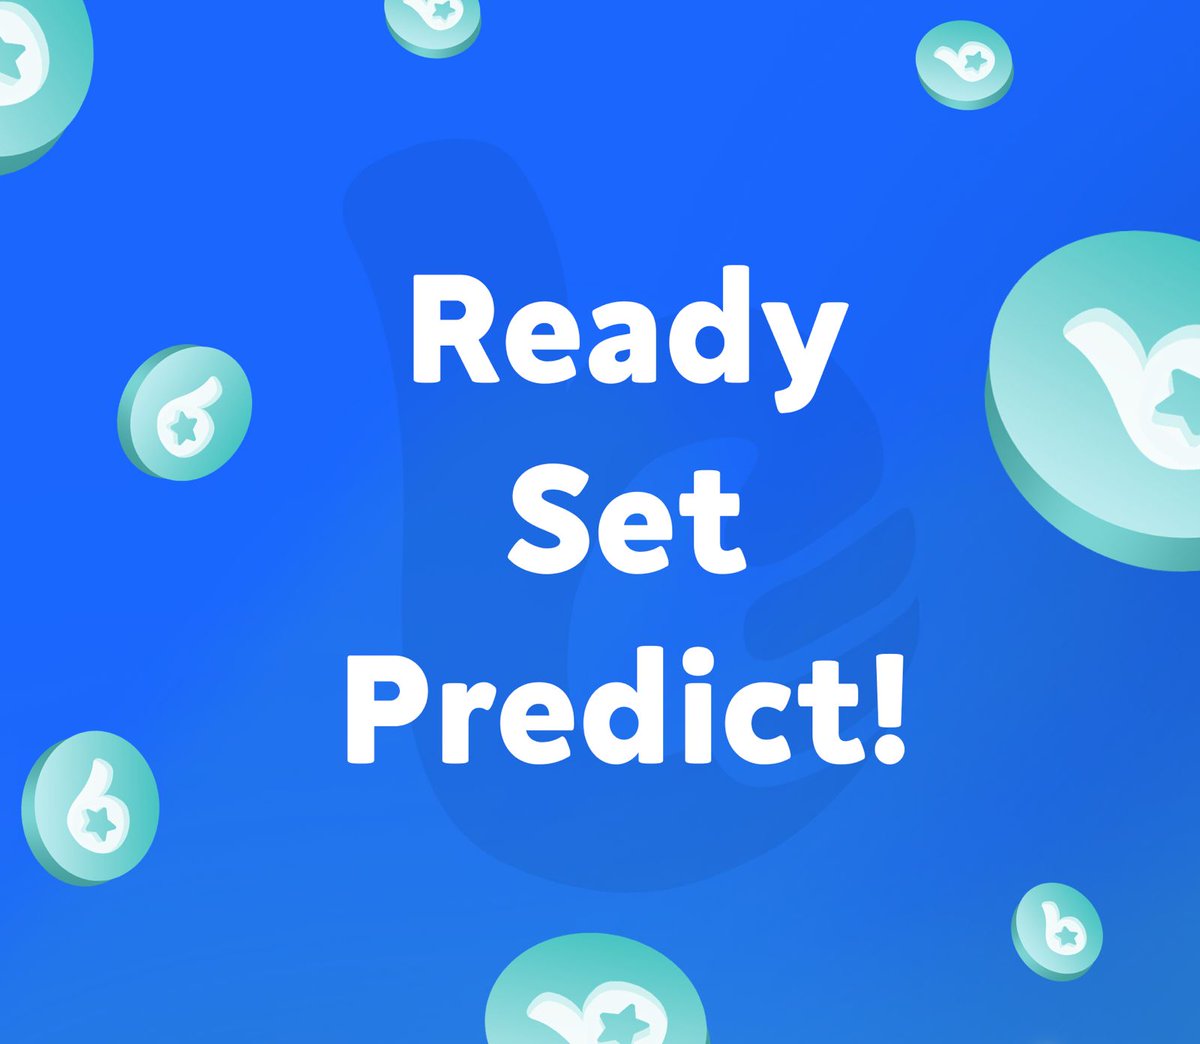 They say good things come to those who wait, and the wait is finally over! 🎉 Pre-match is BACK on Better Fan! Start making your predictions and bag those BTB rewards once again. Let the games begin! 🏆 👉app.better.fan